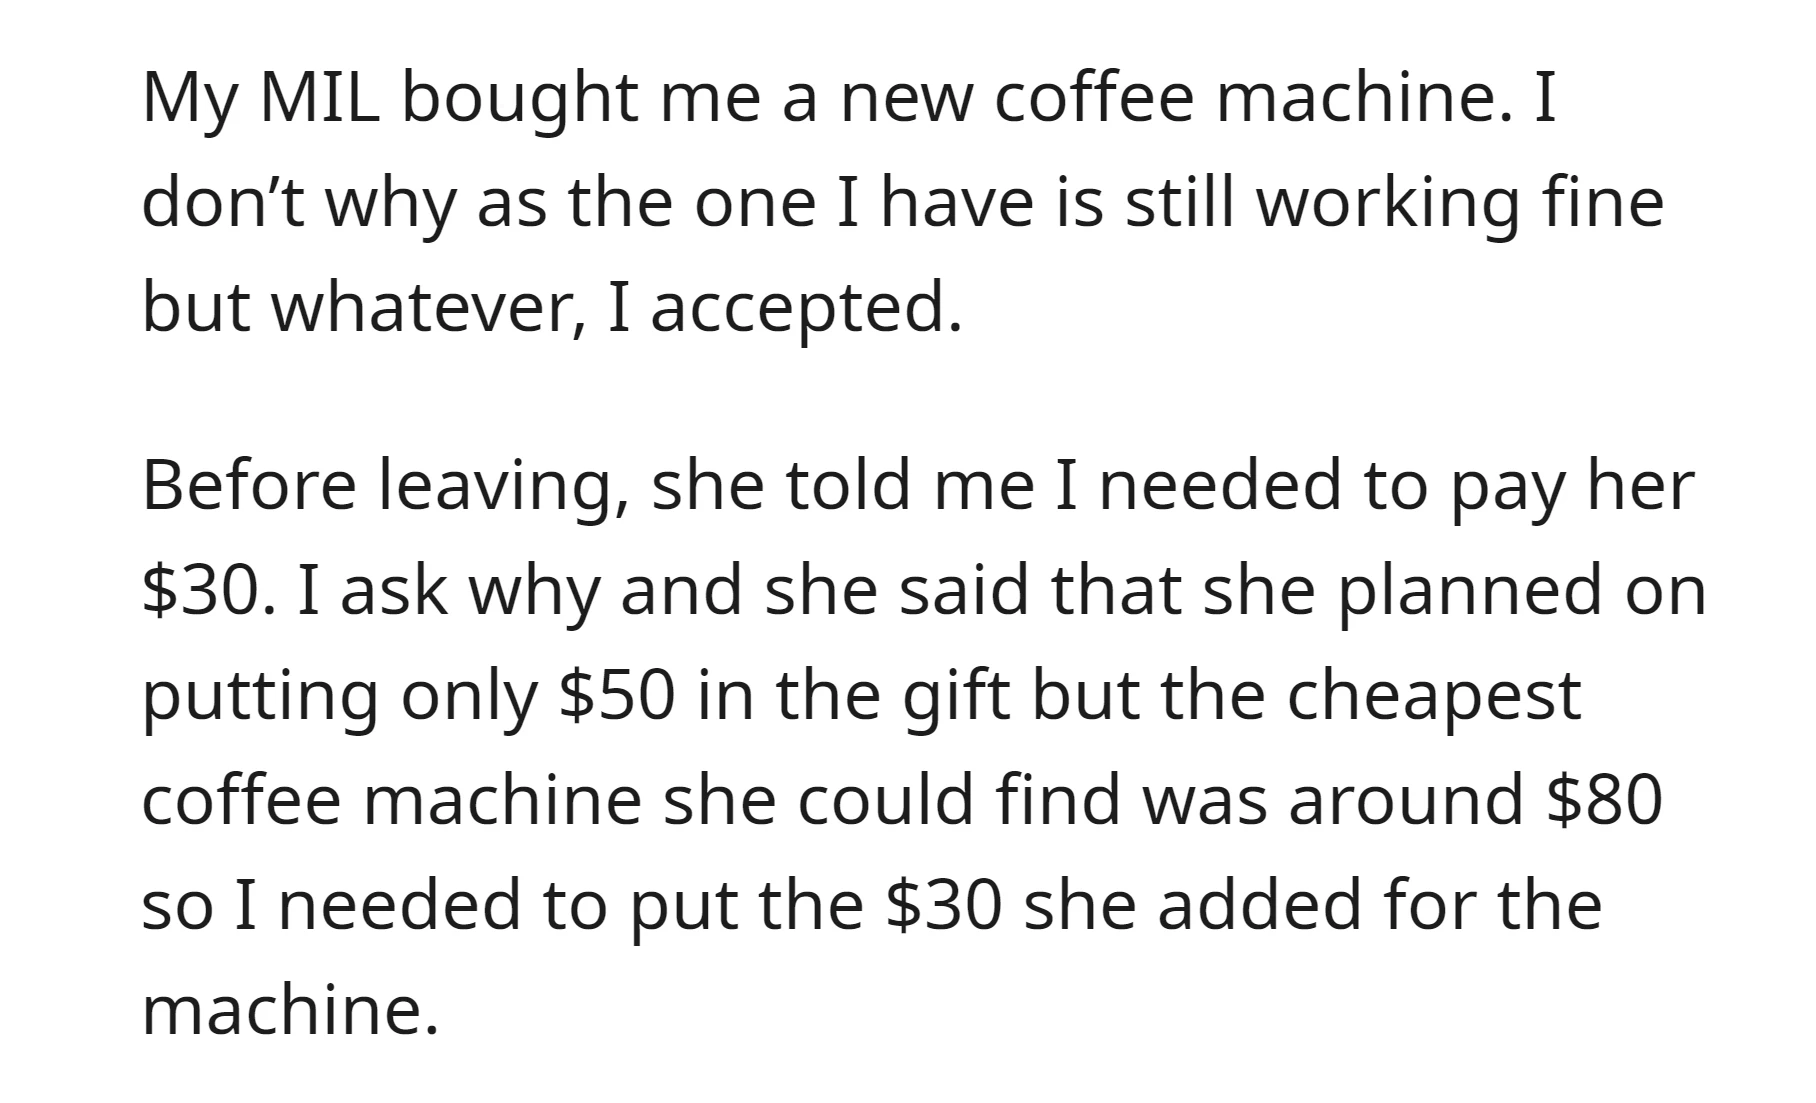 Mother-in-law gave OP a $80 coffee machine